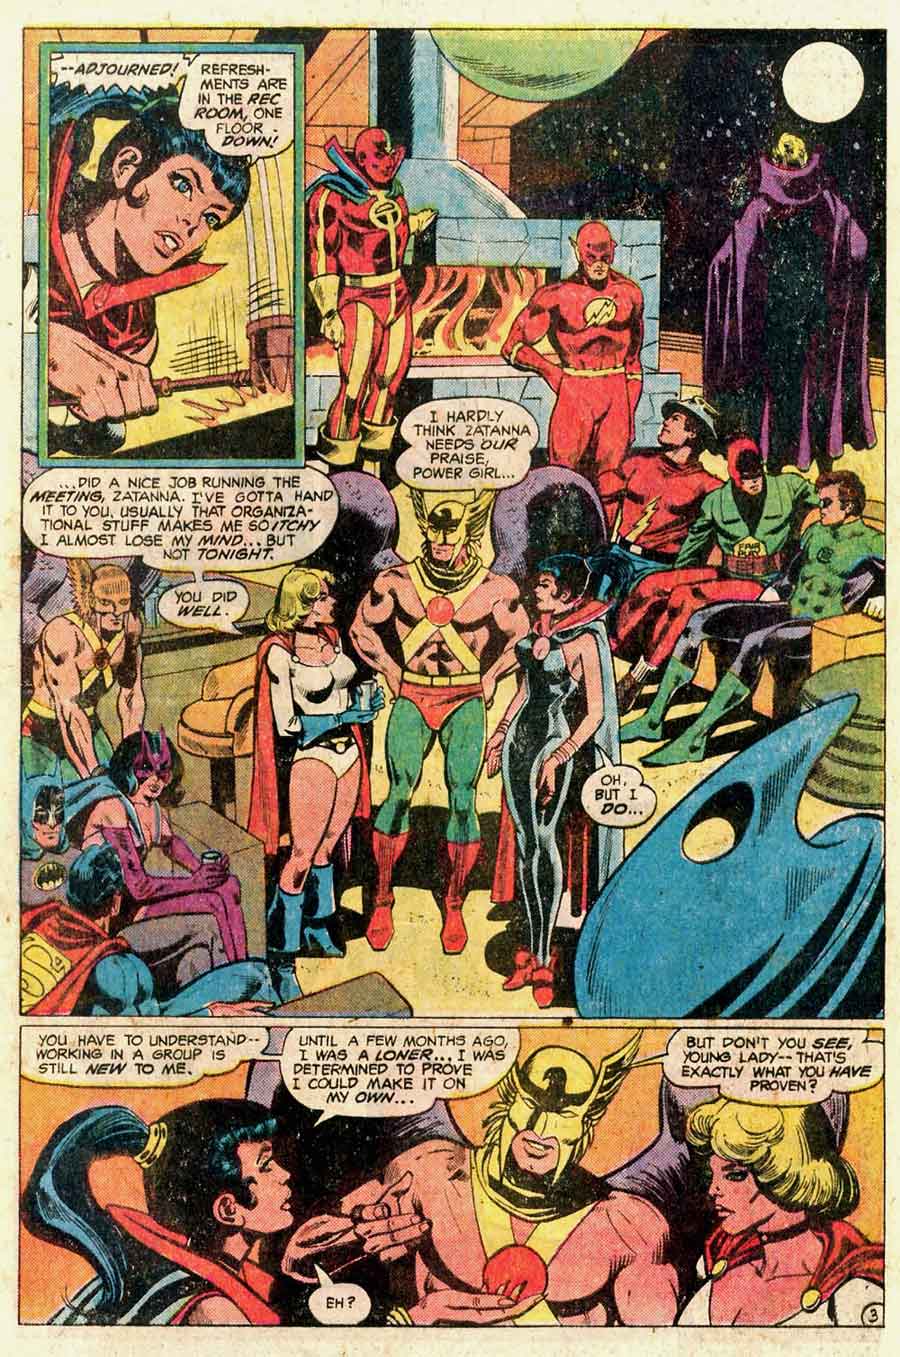 Justice League of America #171 by Gerry Conway, Dick Dillin, and Frank McLaughlin